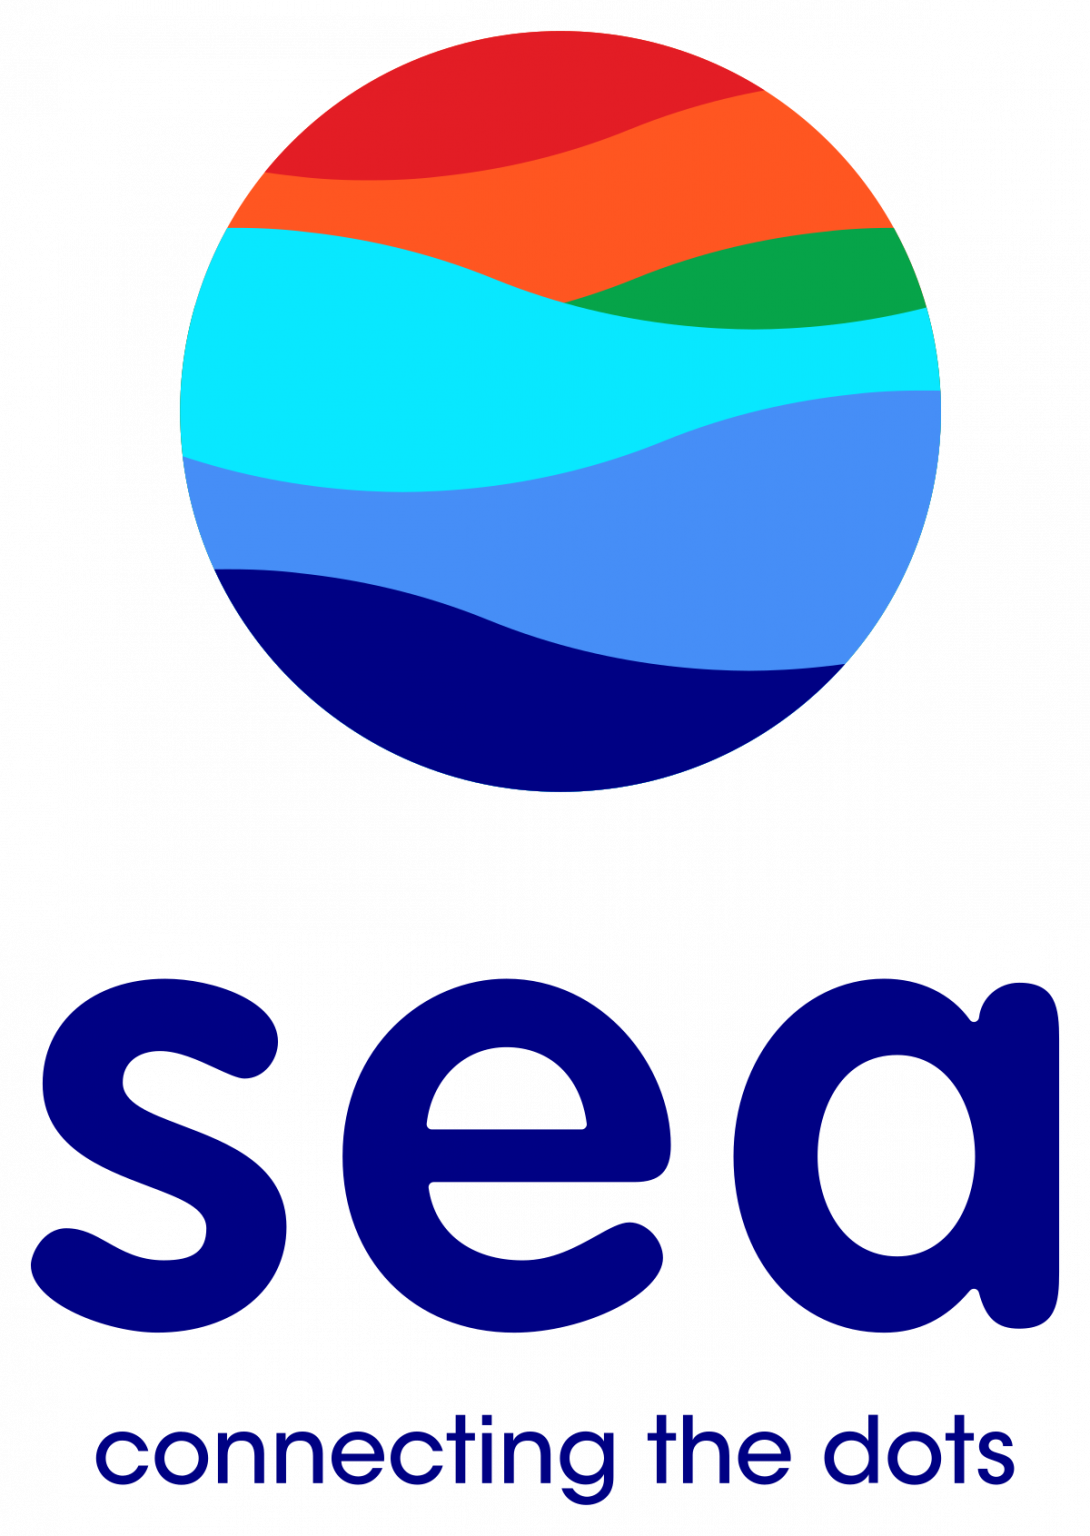 Singapore-based gaming and e-commerce company Sea has lost $132B in market value from its October peak, including $11B in recent days after weak forecasts (Bloomberg)